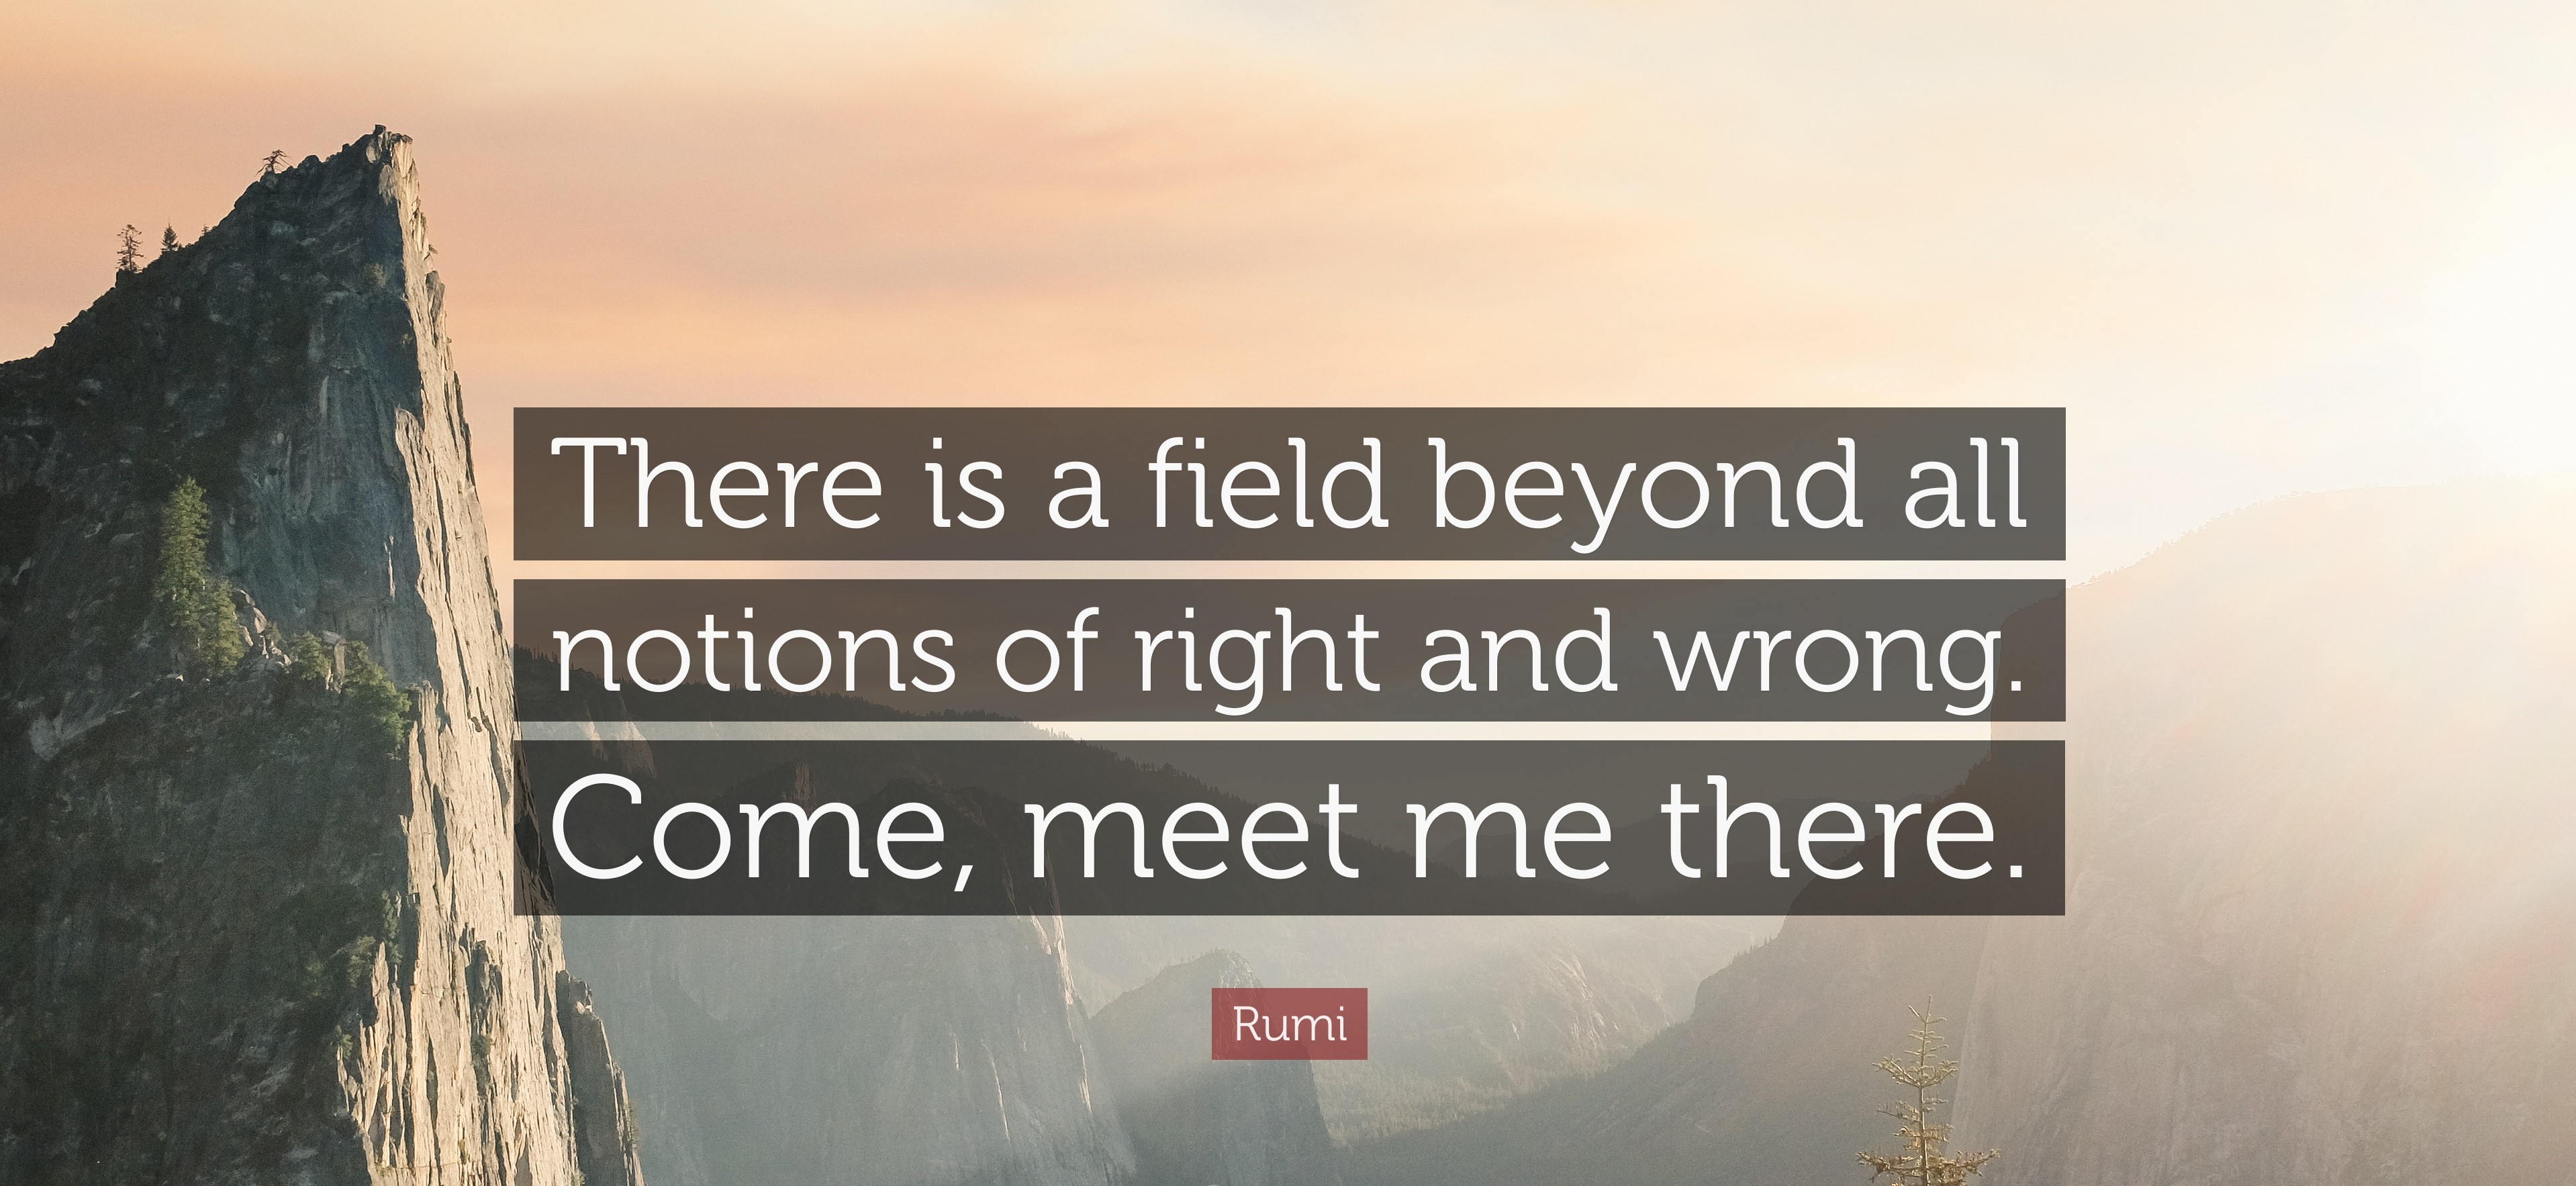 131695-Rumi-Quote-There-is-a-field-beyond-all-notions-of-right-and-wrong